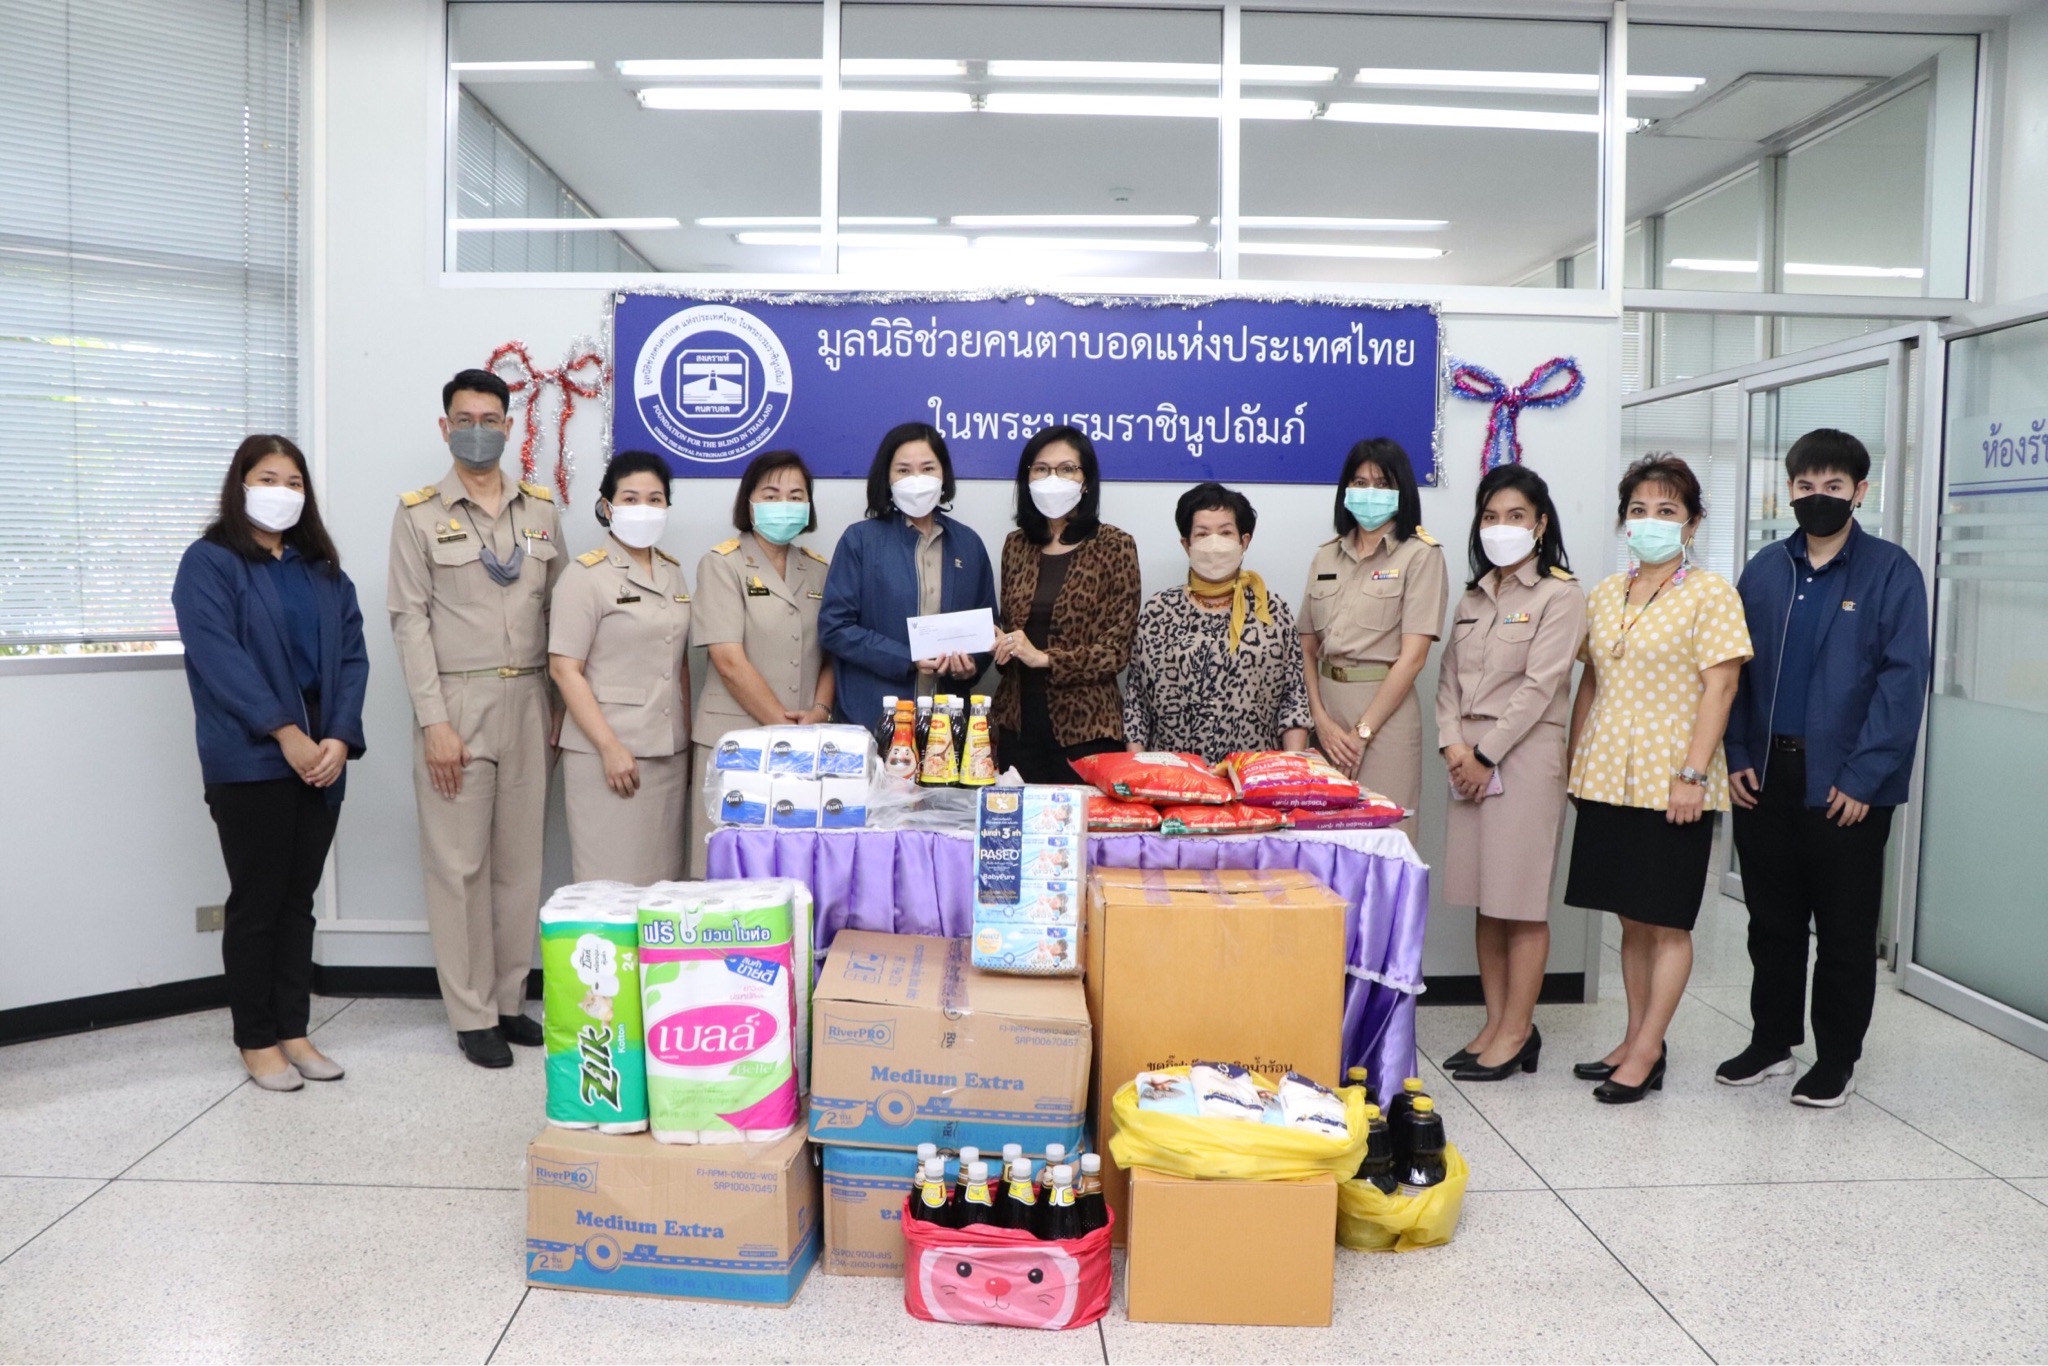 Donation to the Foundation for the Blind in Thailand under the Royal Patronage of H.M. The Queen by OIE